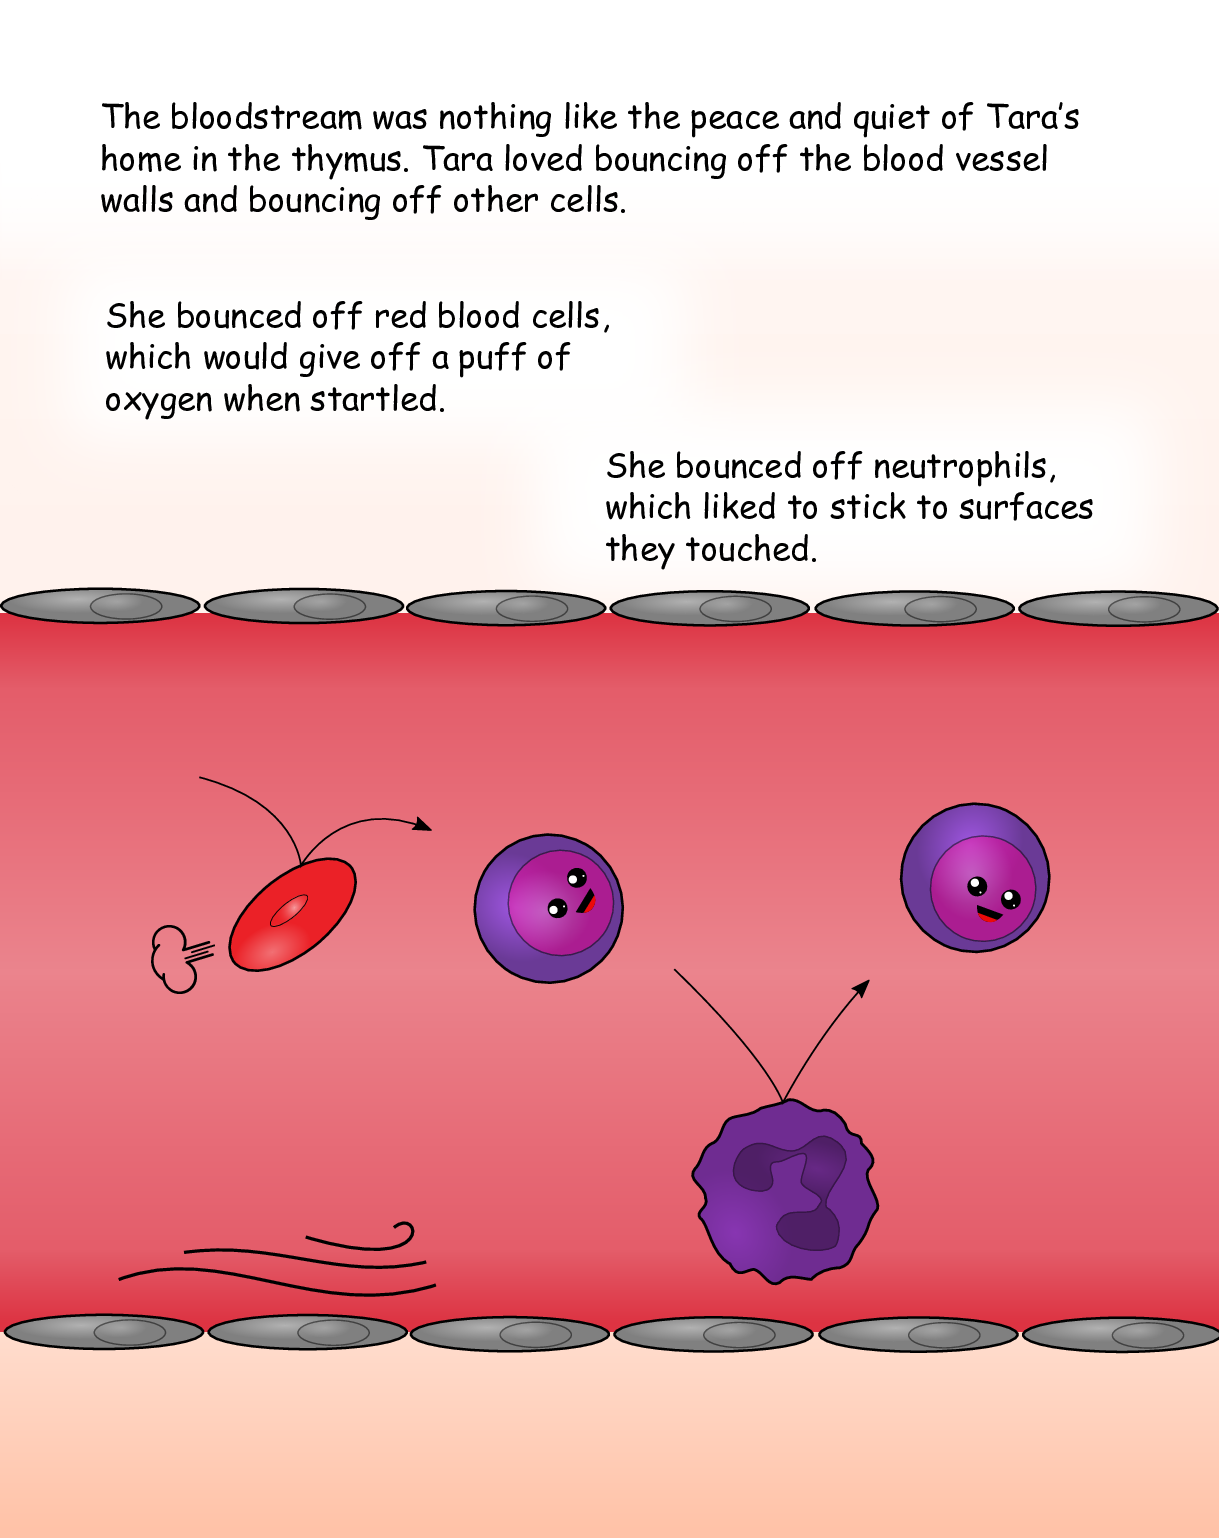 Page 06 (Blood Cells 1)